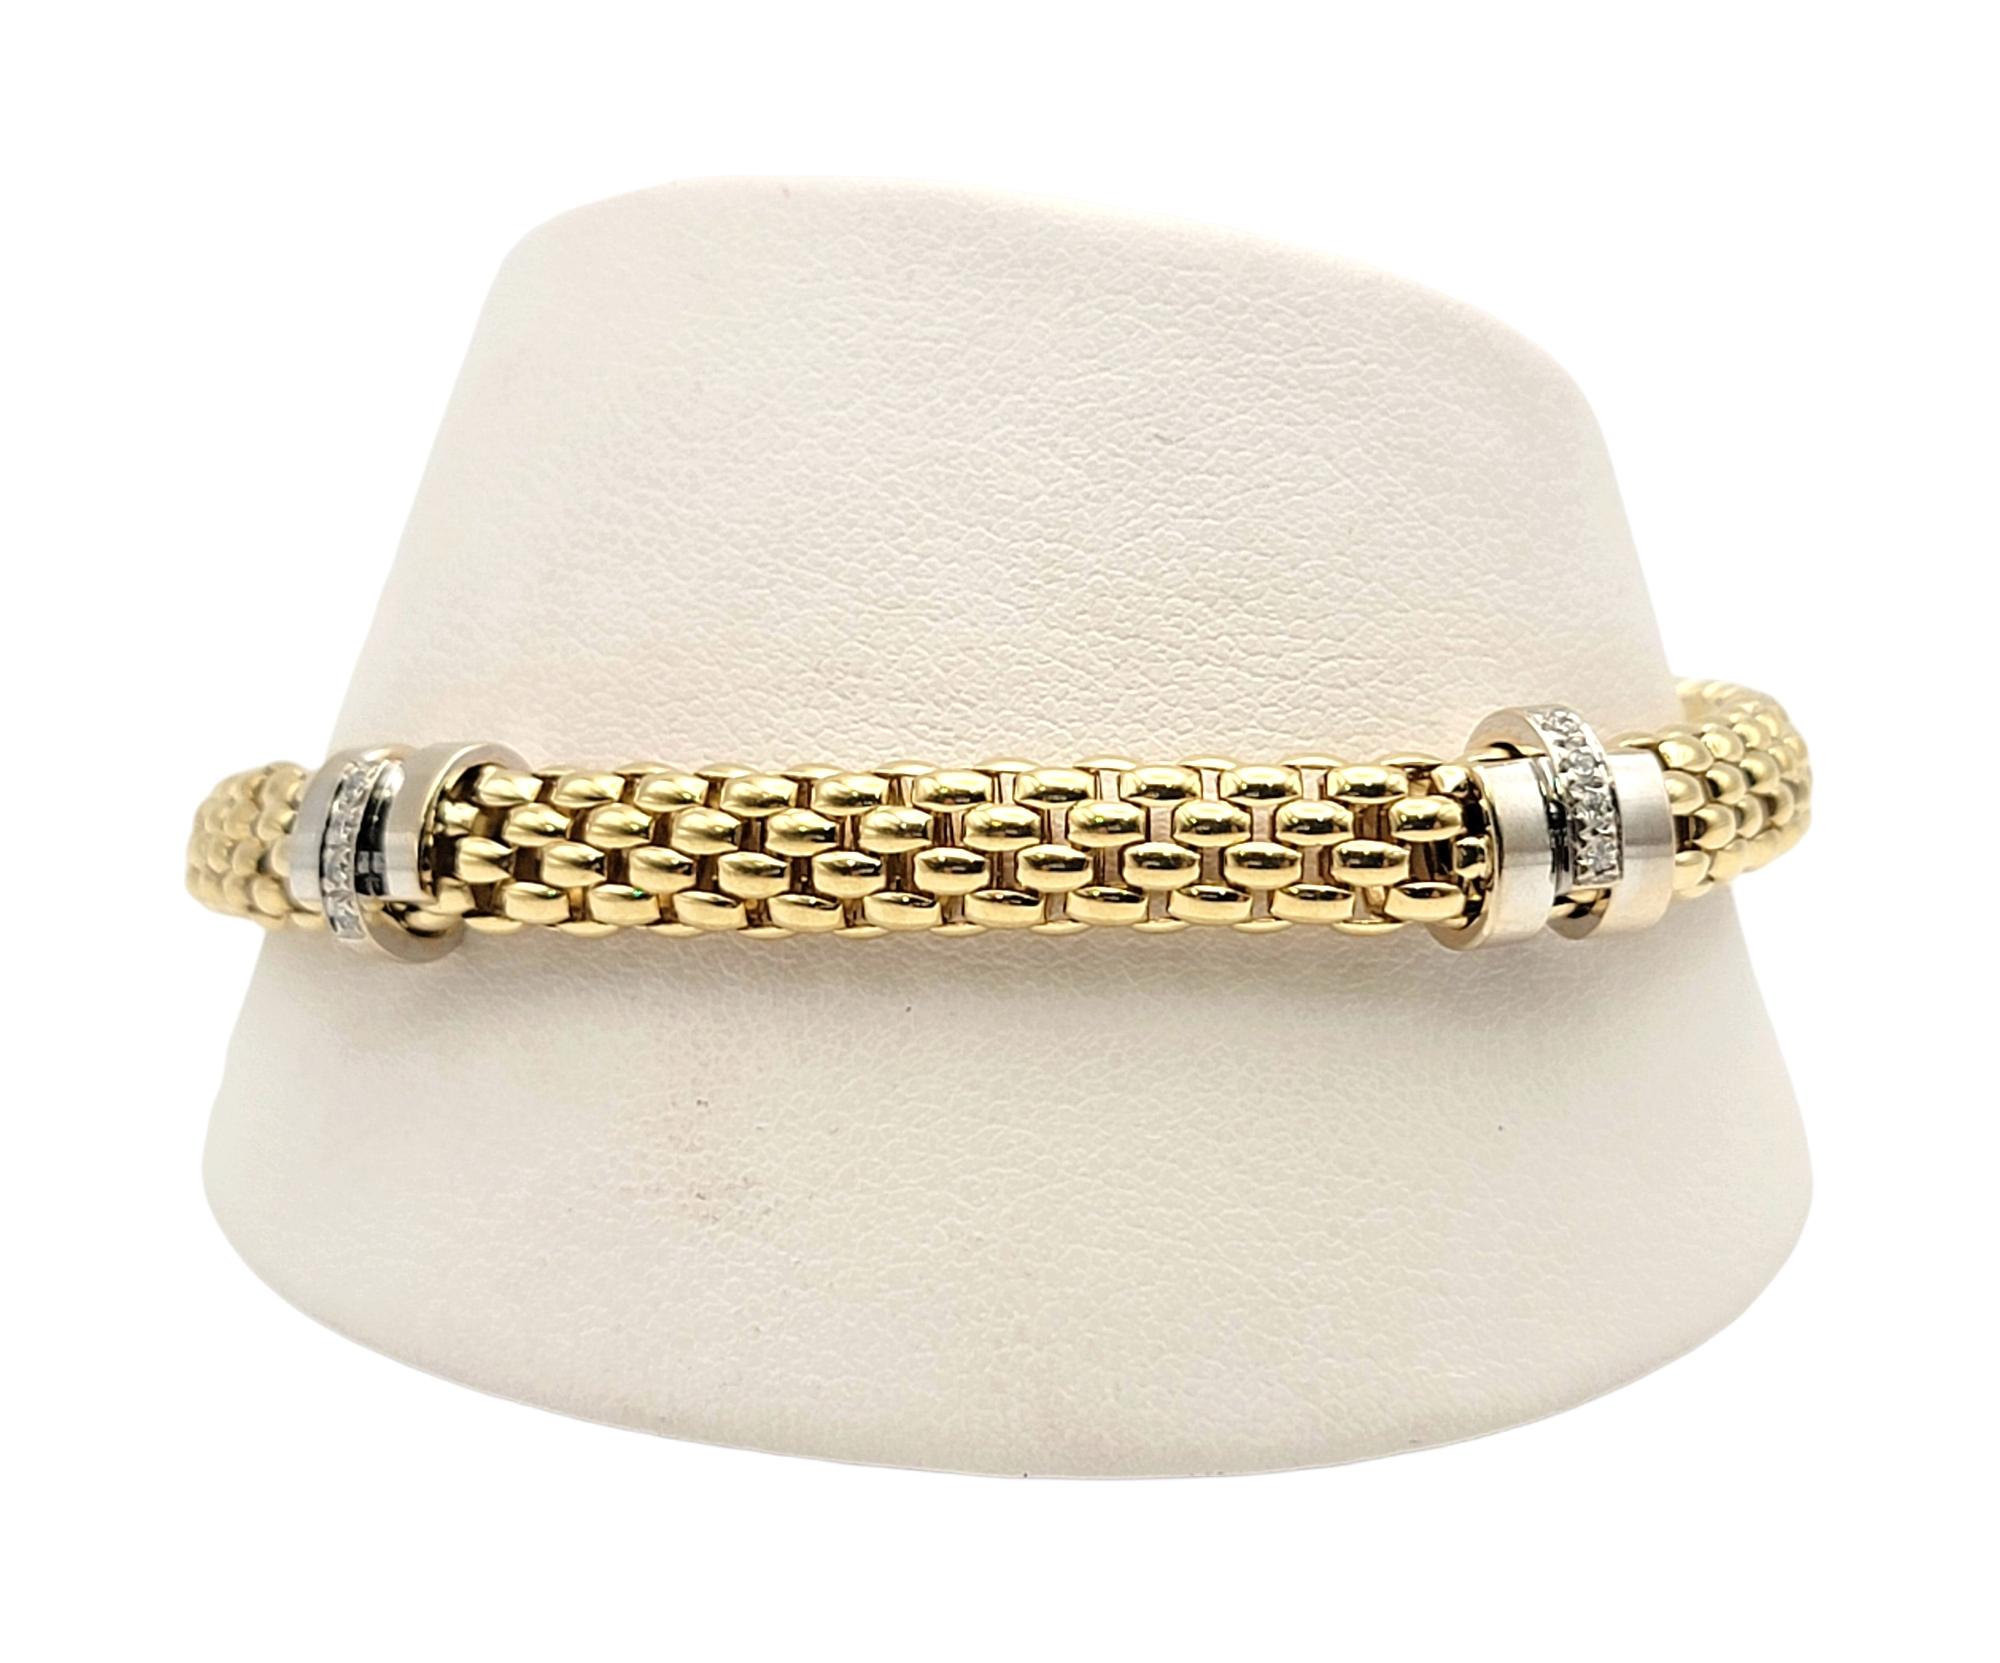 FOPE Two Tone 18 Karat Gold Mesh Link Bracelet with Pave Diamond Accents 5